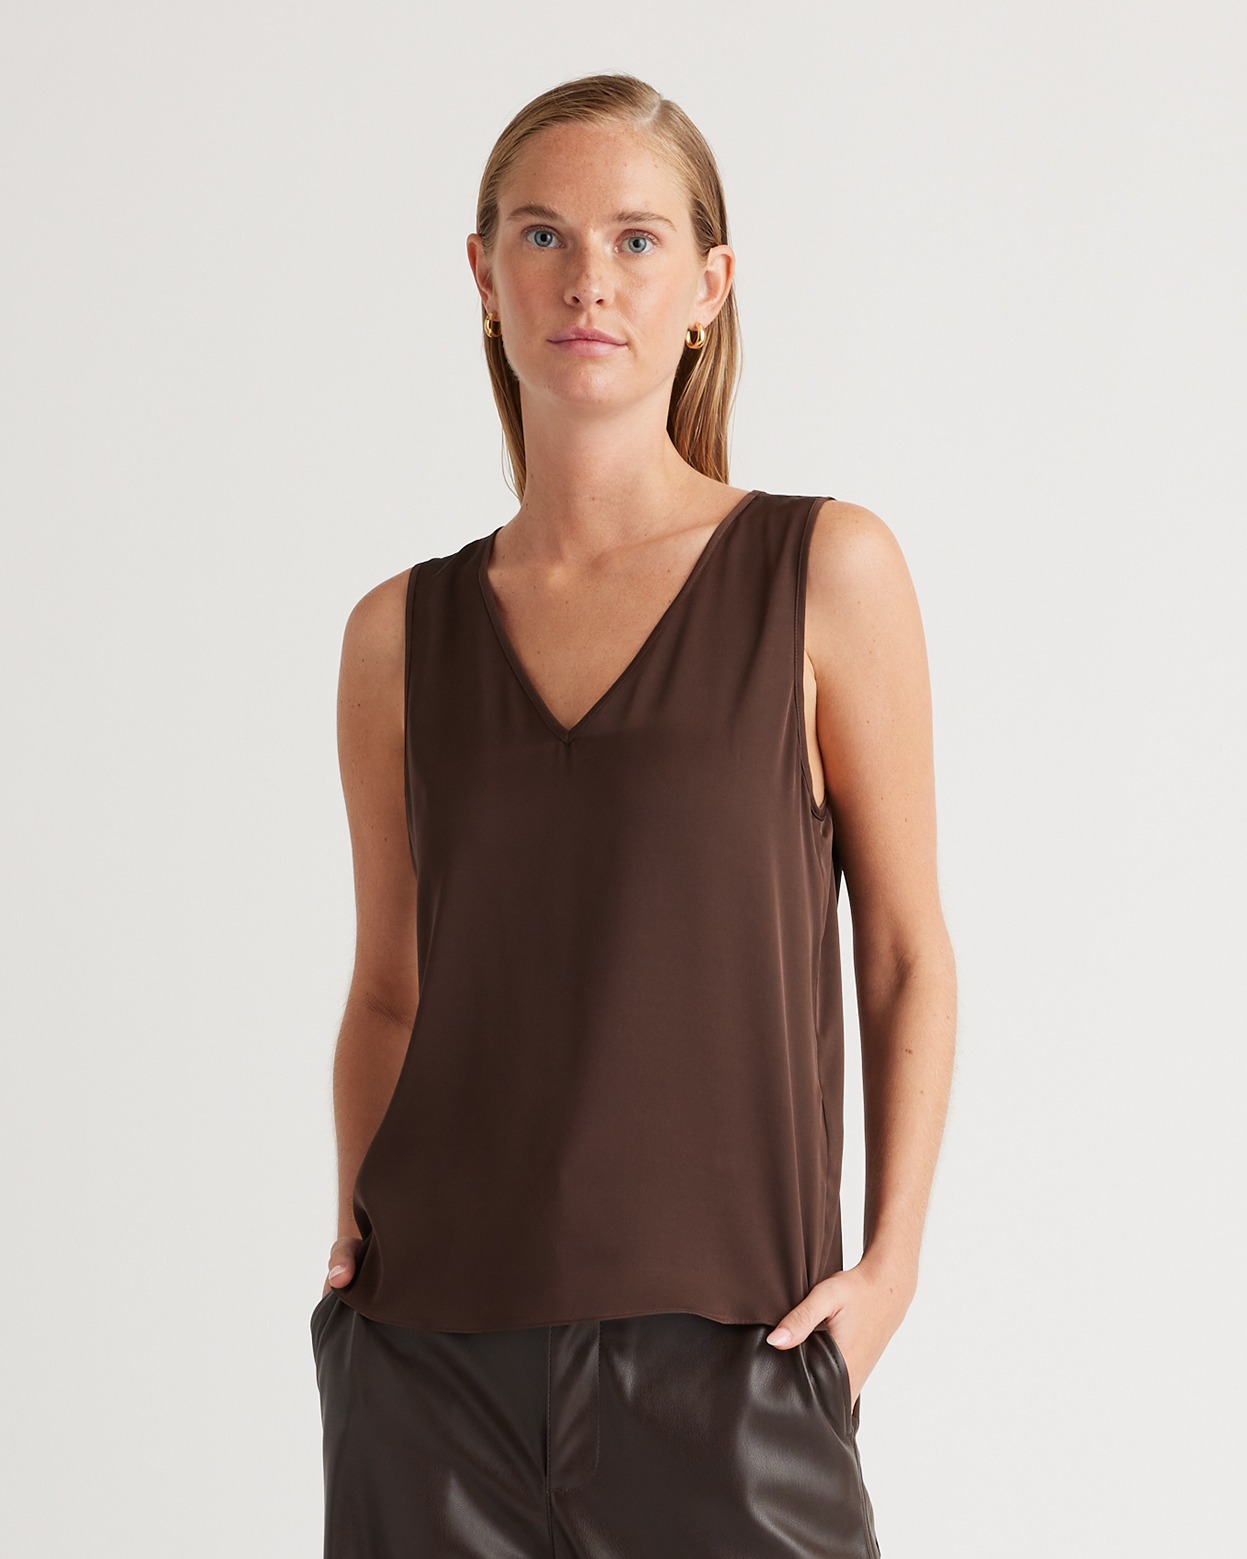 Know One Cares Cropped Faux Leather Tank Top - Women's Tank Tops